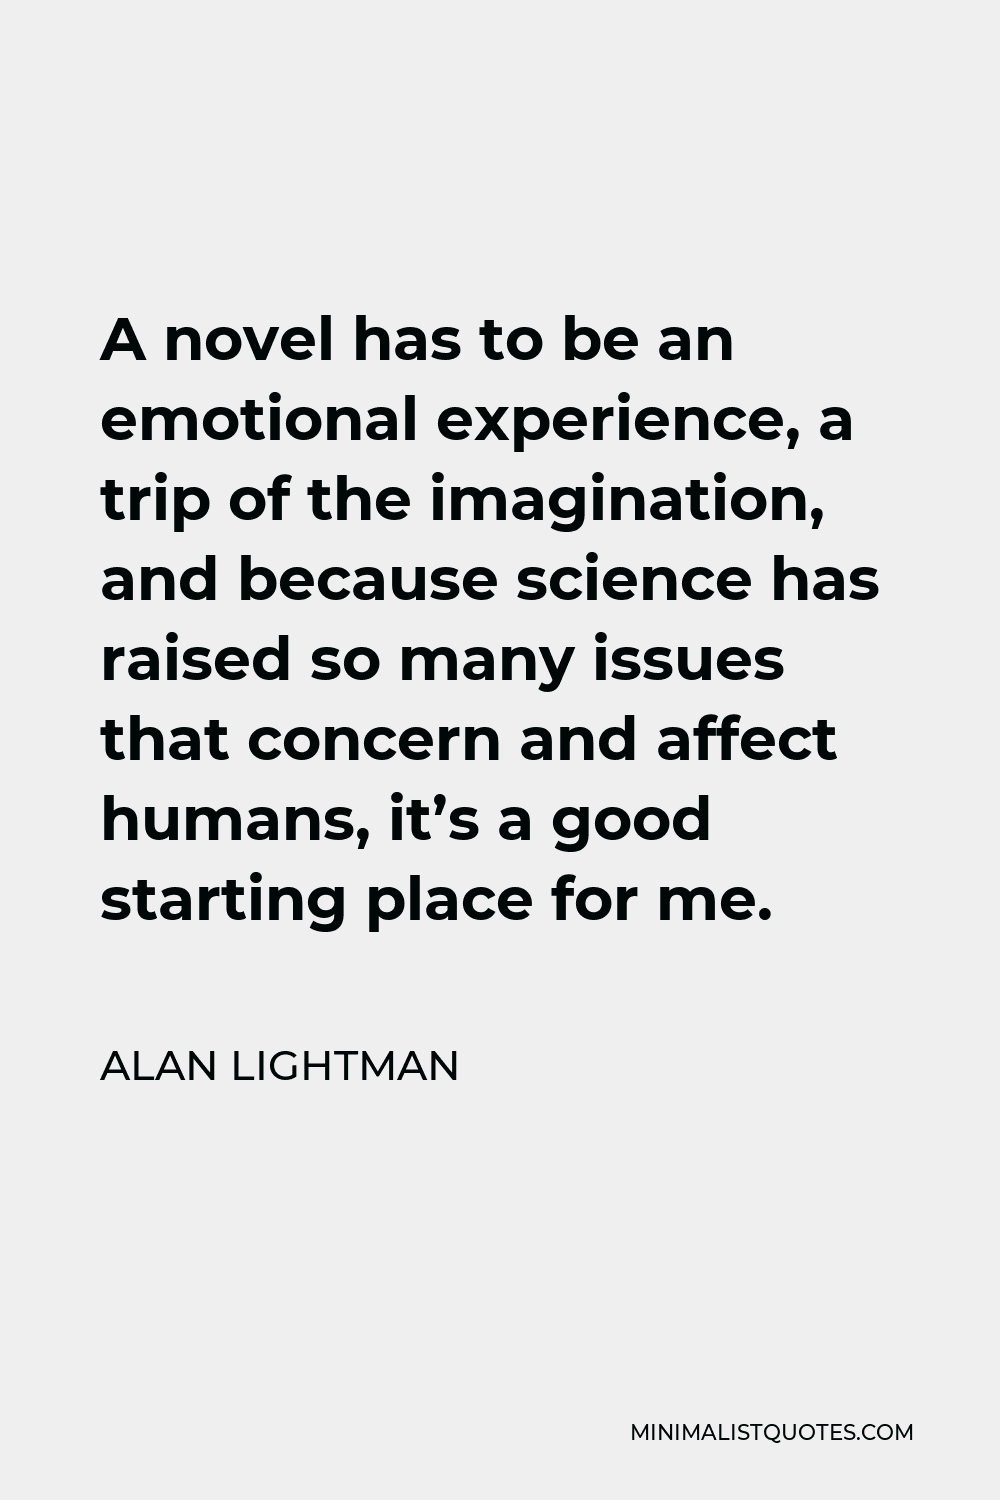 Alan Lightman Quote - A novel has to be an emotional experience, a trip of the imagination, and because science has raised so many issues that concern and affect humans, it’s a good starting place for me.